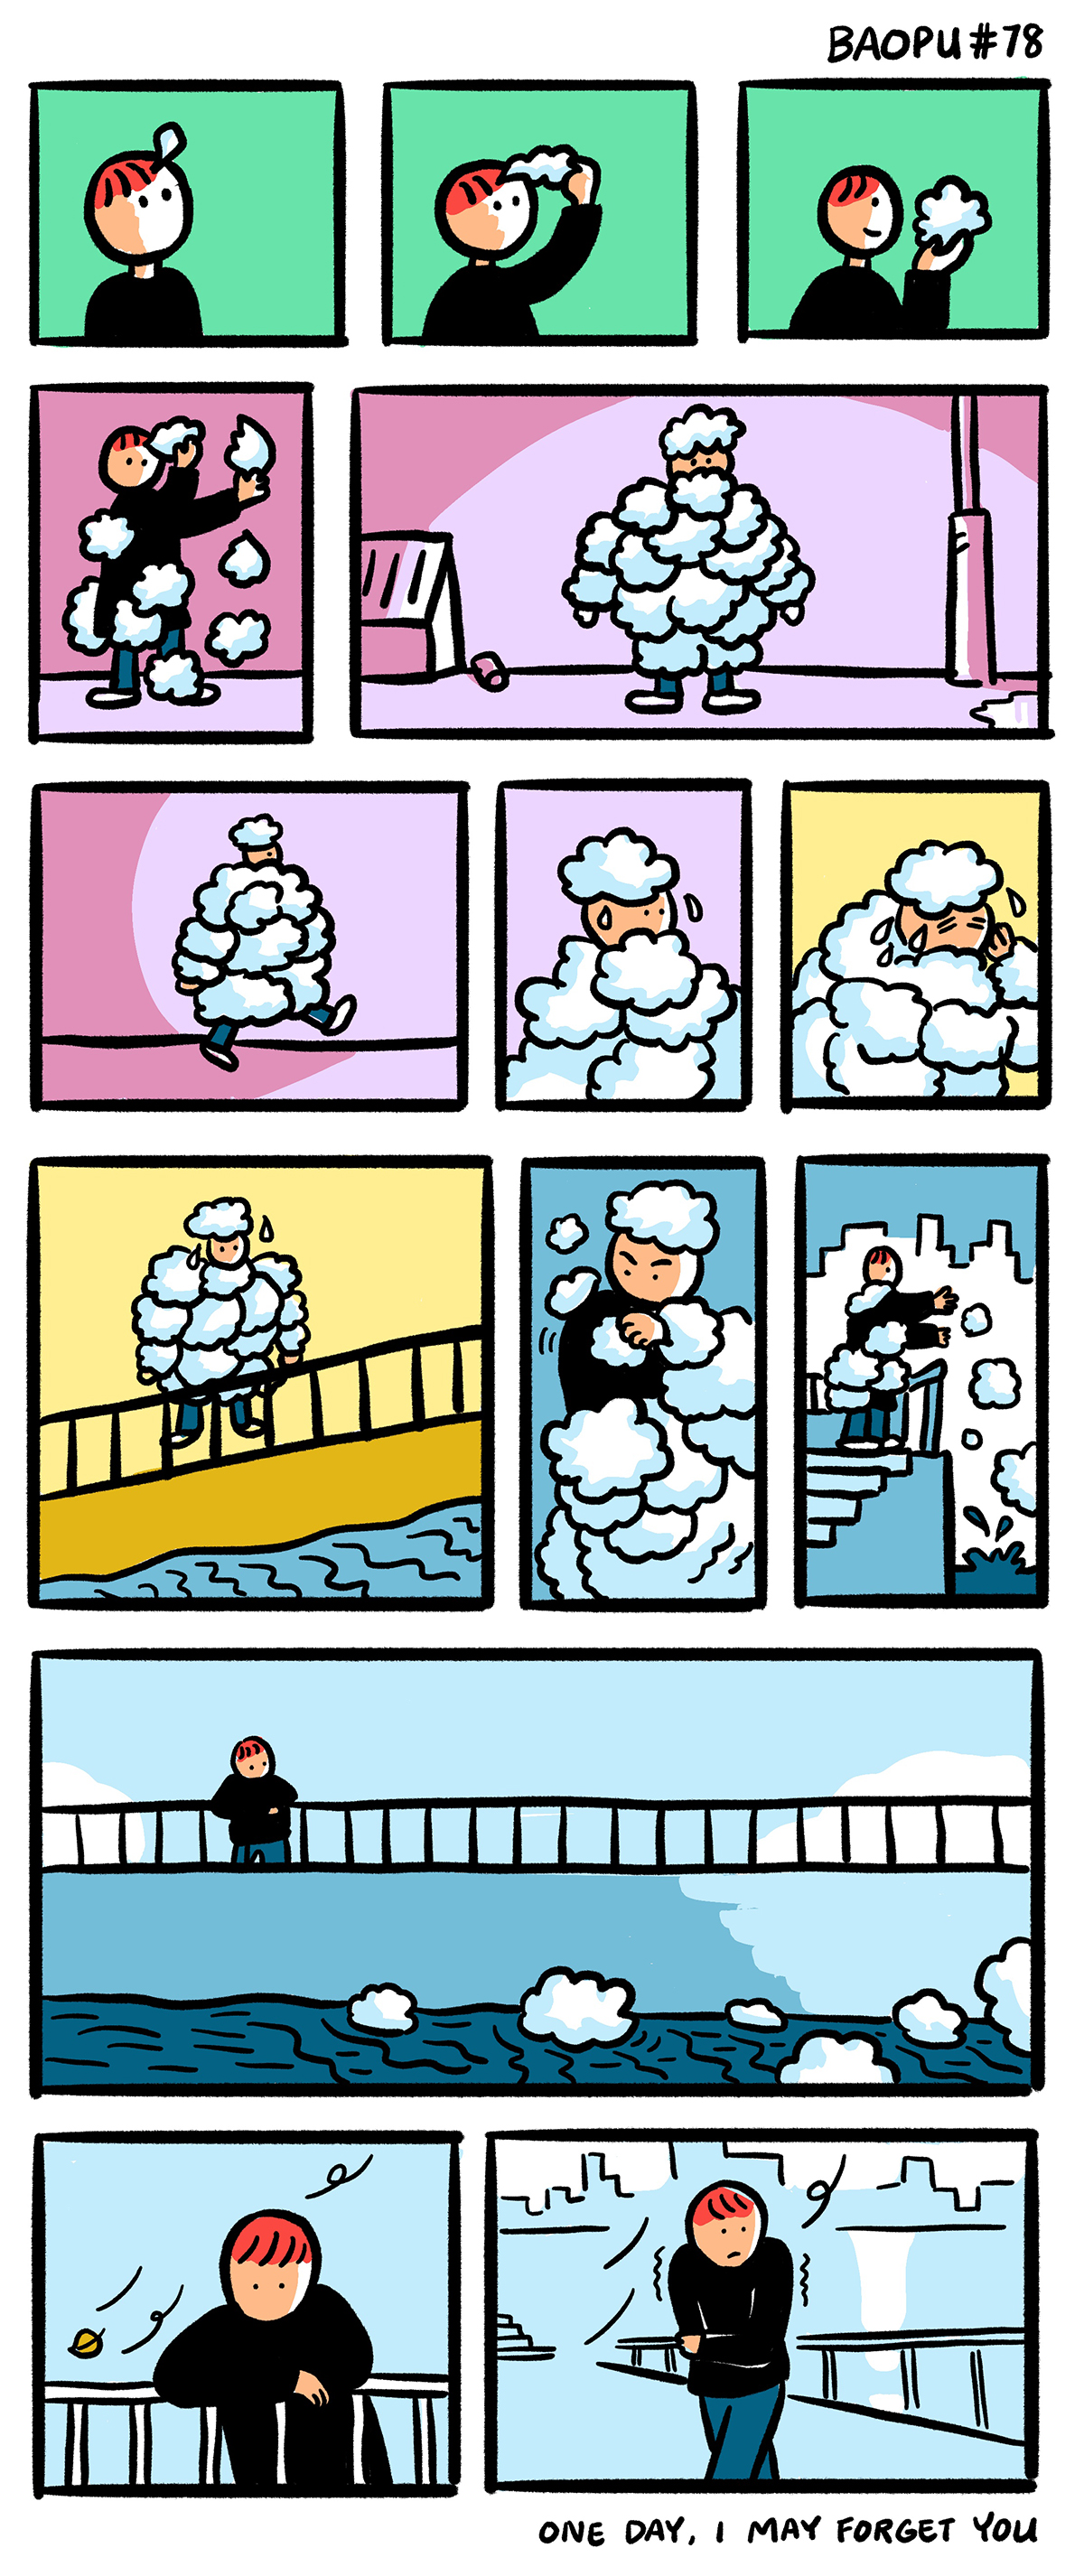 In a 14 panel multi-colored comic, Yao starts by remembering a thought. It comes out like a fluffy cloud. Soon the fluffy clouds grow and grow, covering Yao's entire body. They got outside with all these memories surrounding them like a fluffy coat. Eventually, Yao takes the clouds to the ocean and lets them go one by one into the water. Now, without the memory coat surrounding them, they shiver cold and alone. Beneath the final comic is the sentence "One day, I may forget you."